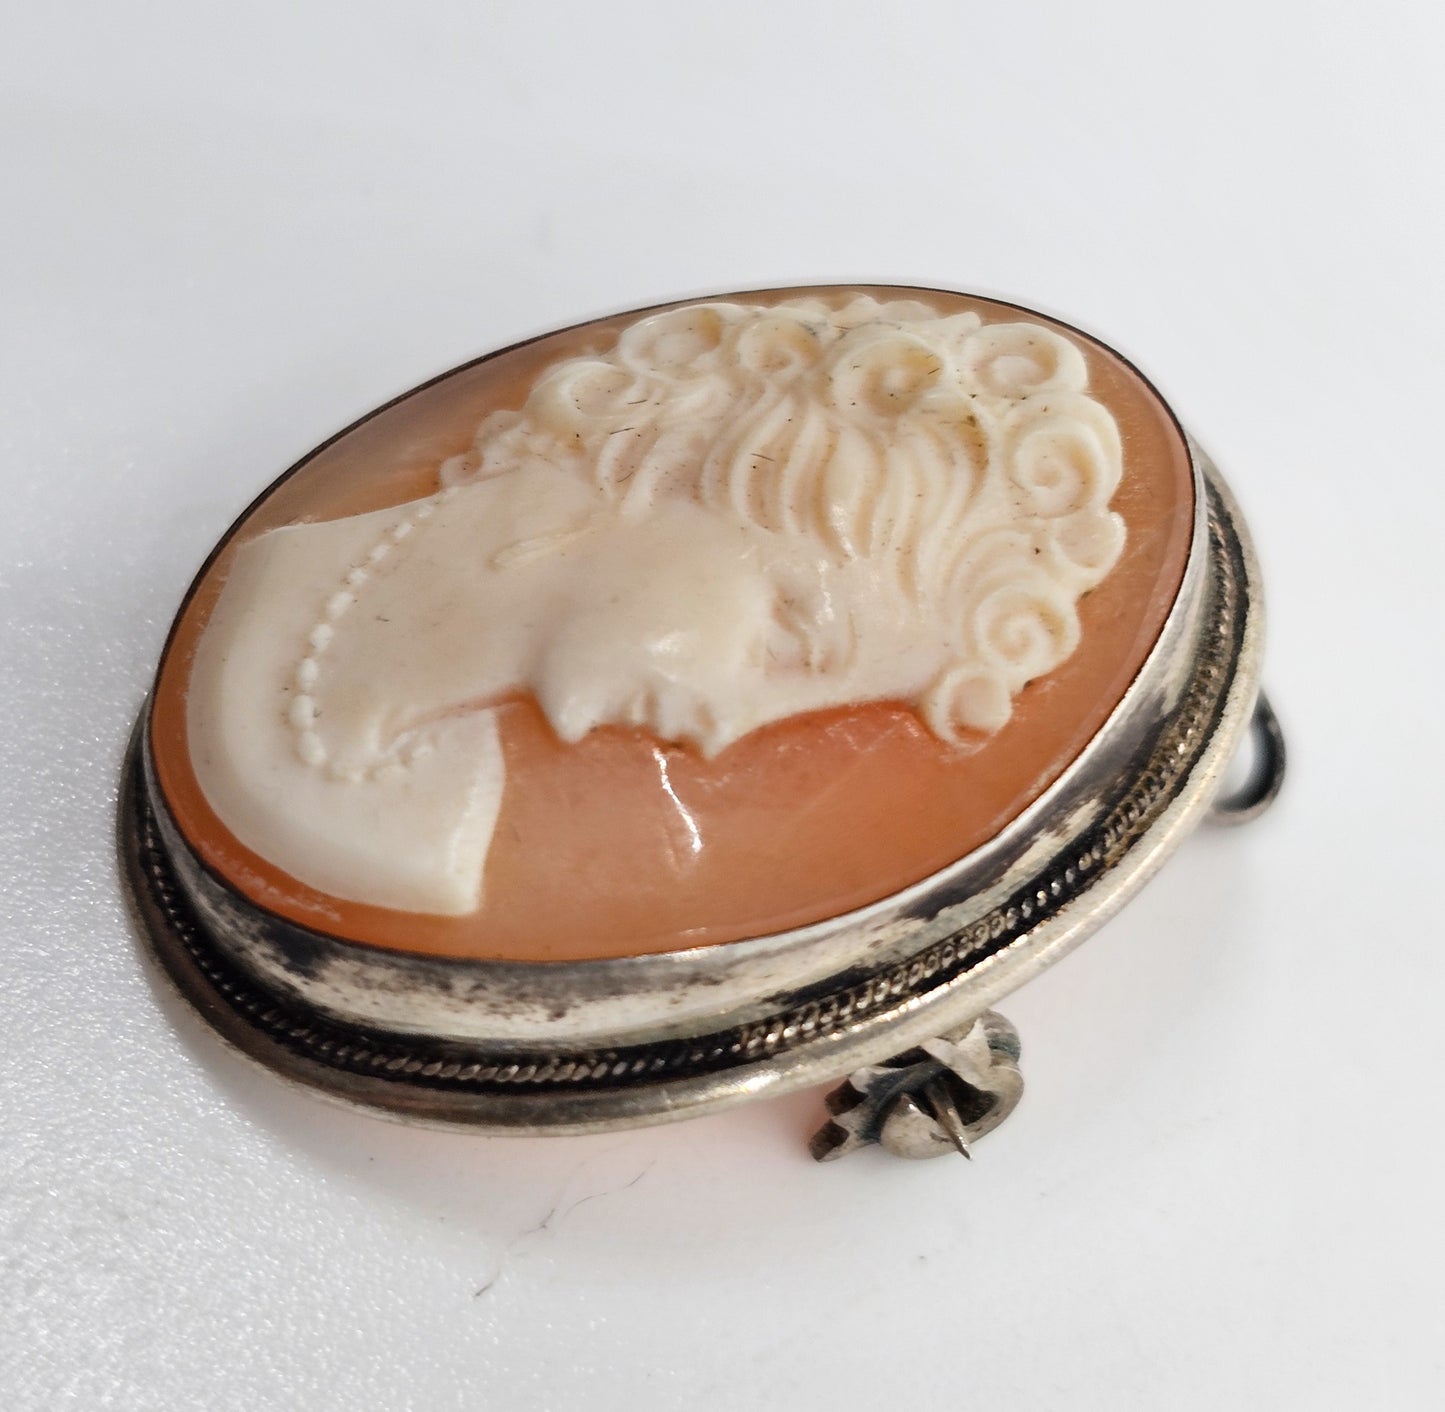 Camexco & C Carved Shell Cameo sterling silver vintage convertible pendant brooch